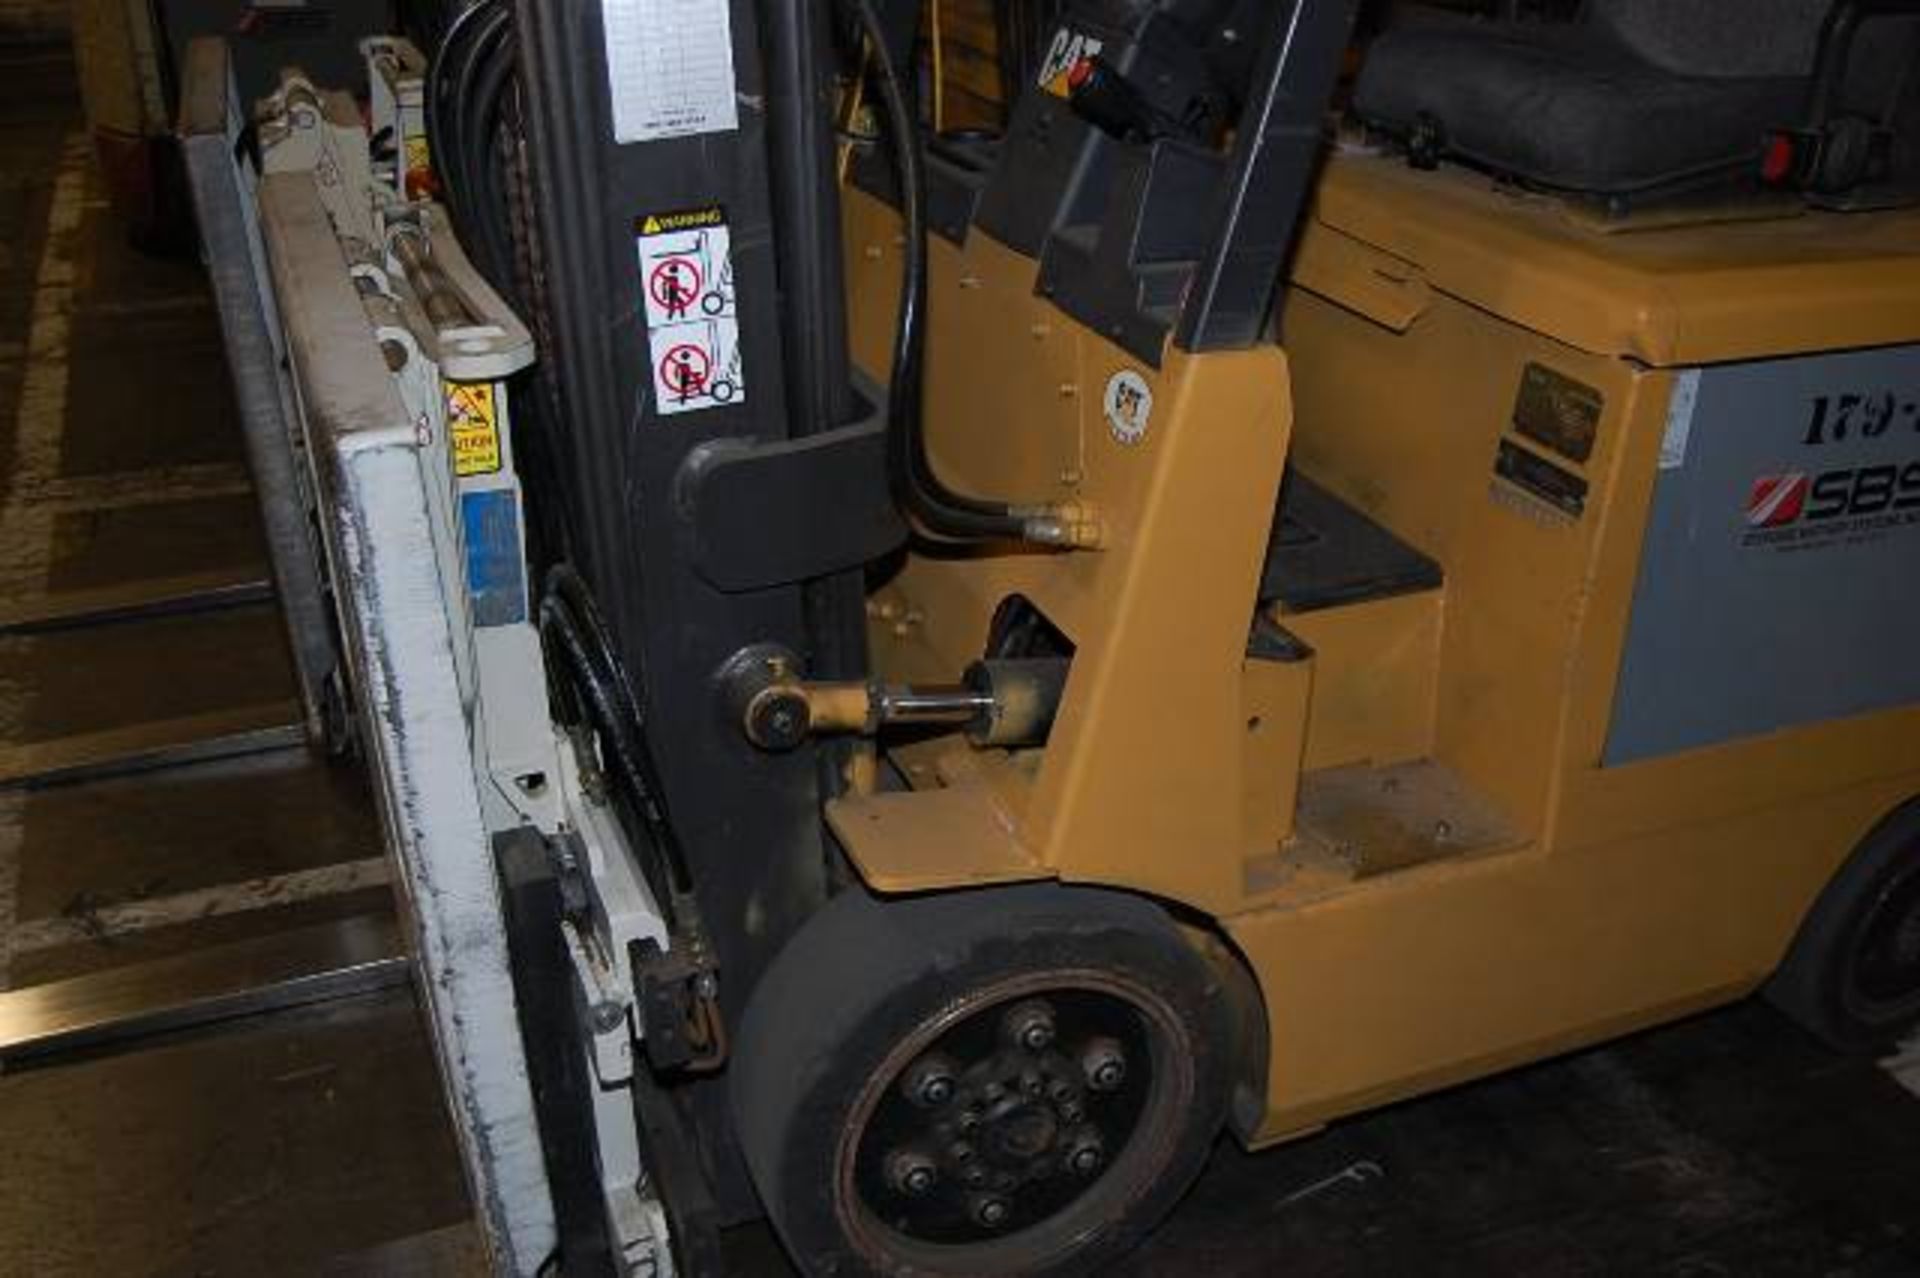 Caterpillar Model #2EC25 Electric Fork Lift, Rated 5000 lbs. Capacity, Side Shift, Solid Tires, - Image 3 of 3